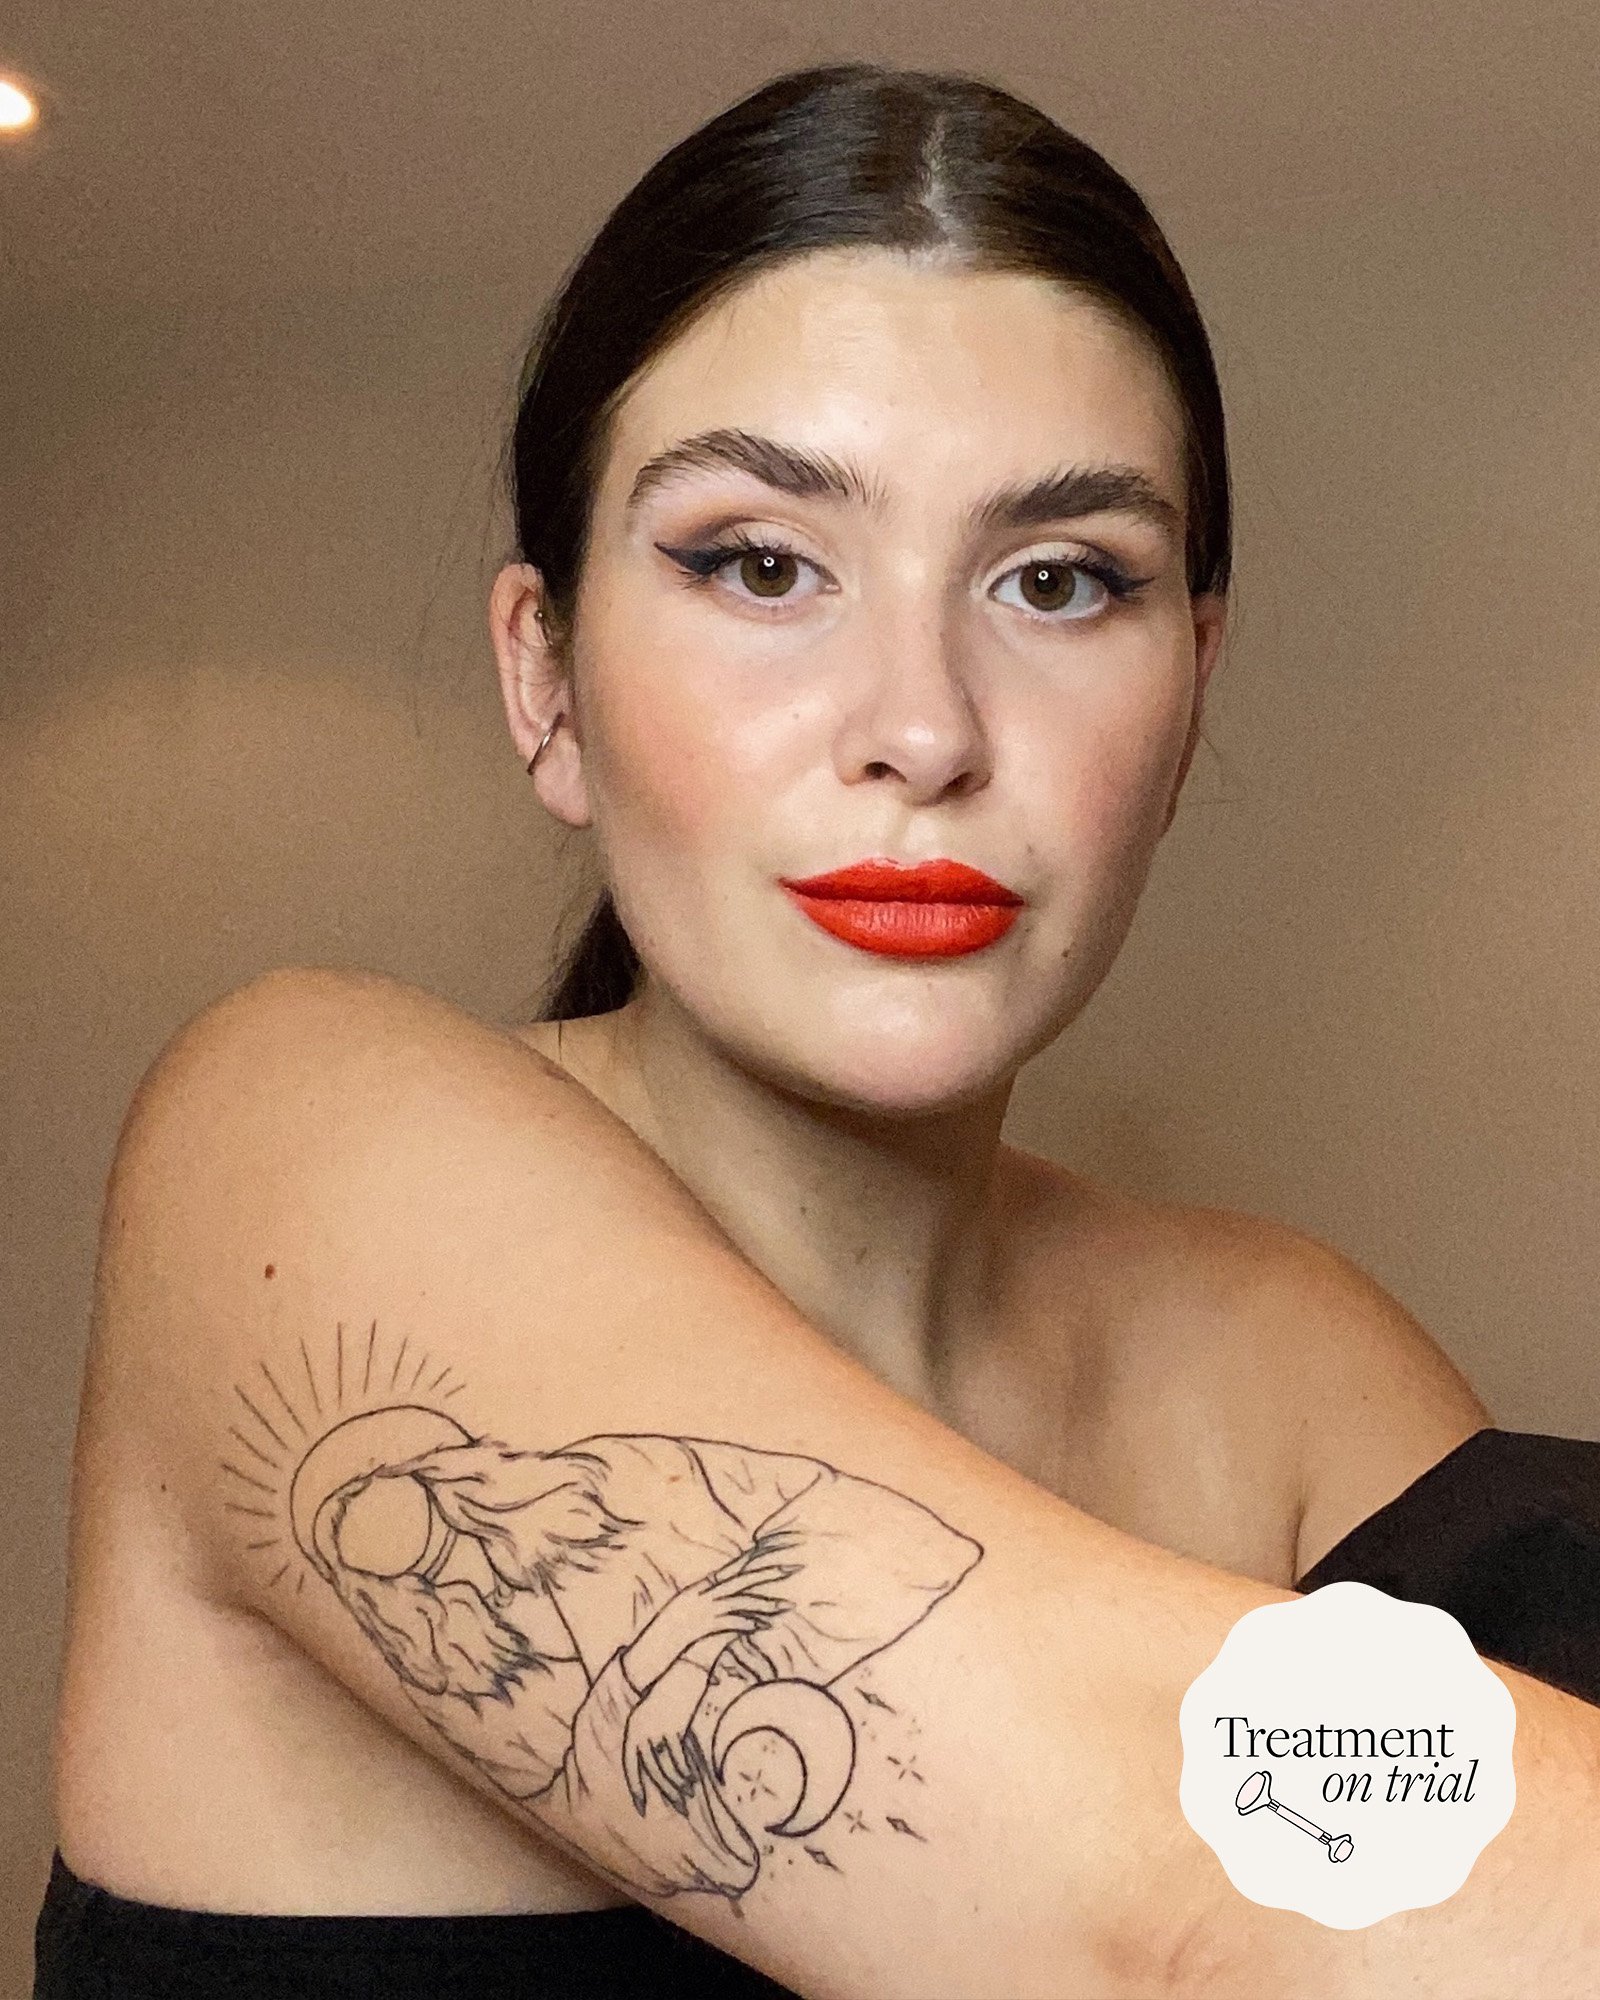 I Tried NAAMA's Laser Tattoo Removal, This Is What It Looks Like